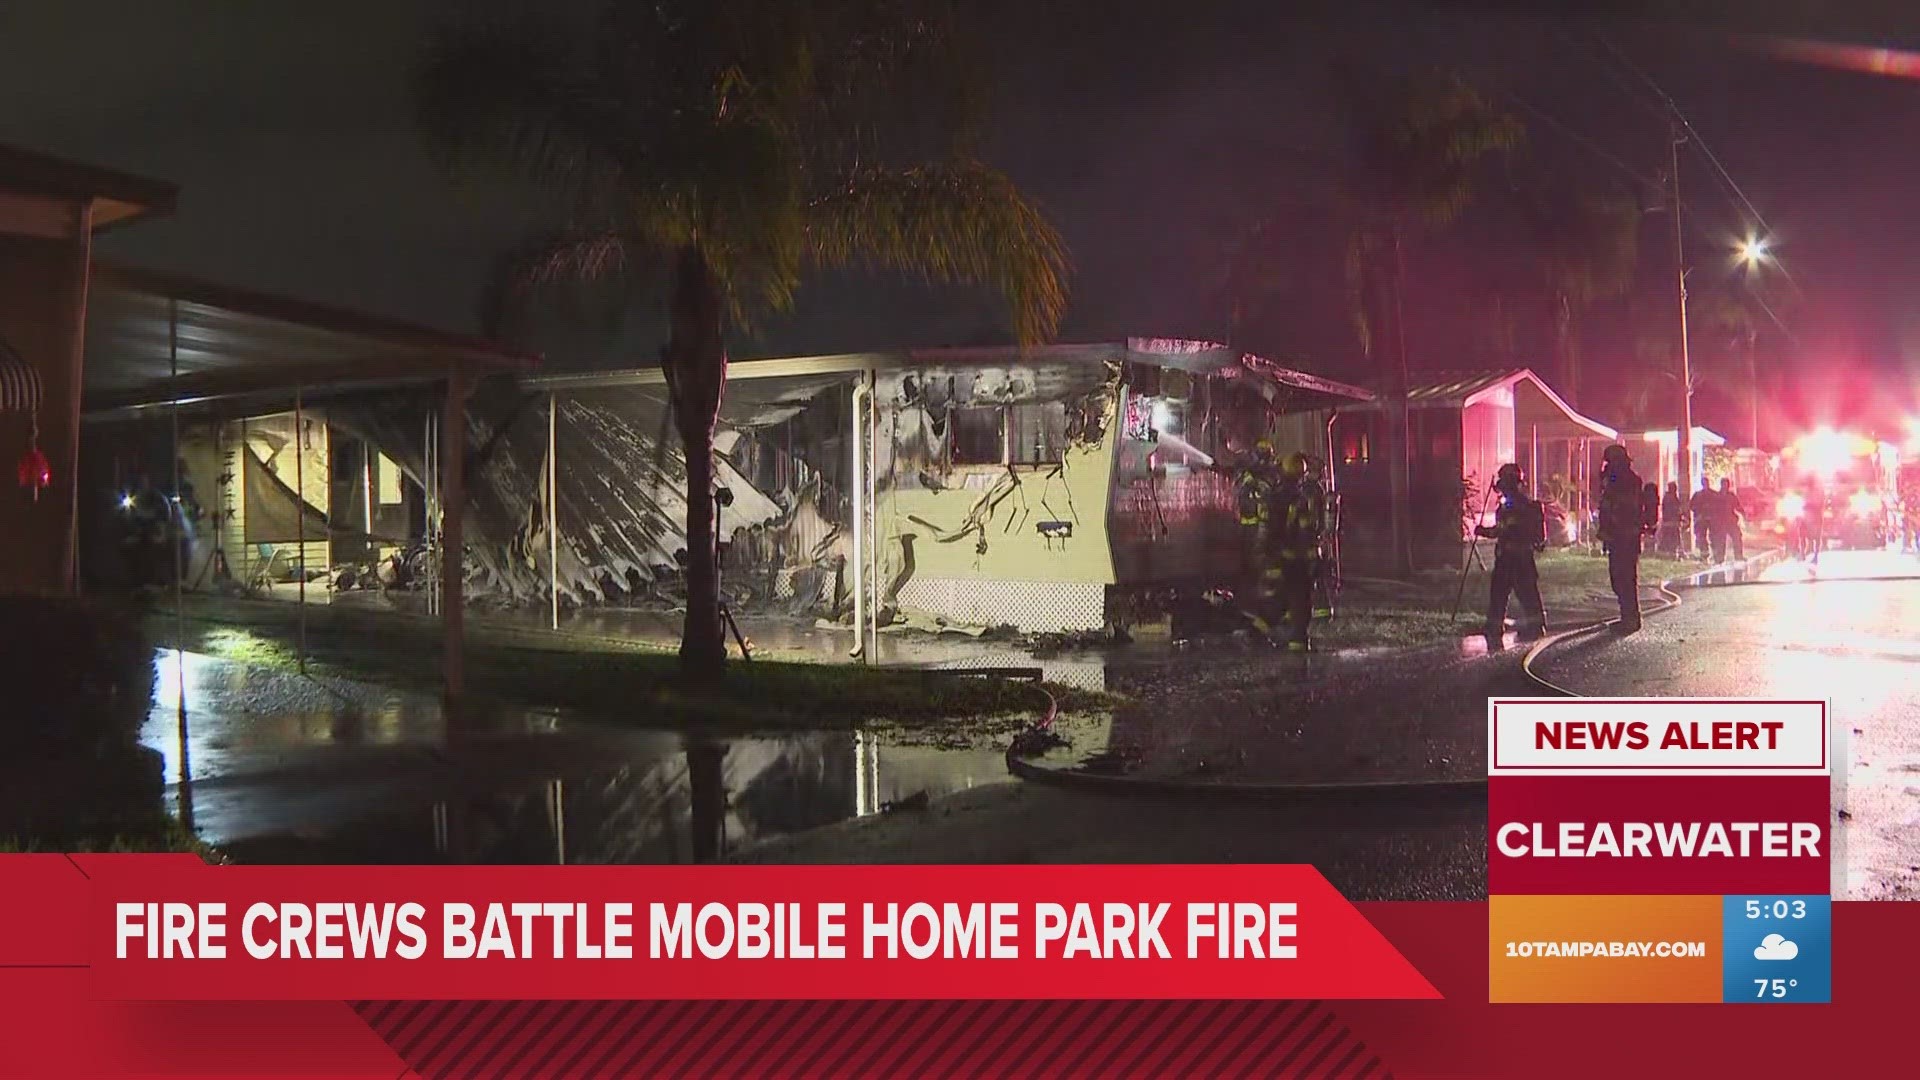 Neighbors told 10 Tampa Bay the woman who lives in the mobile home is out of town.